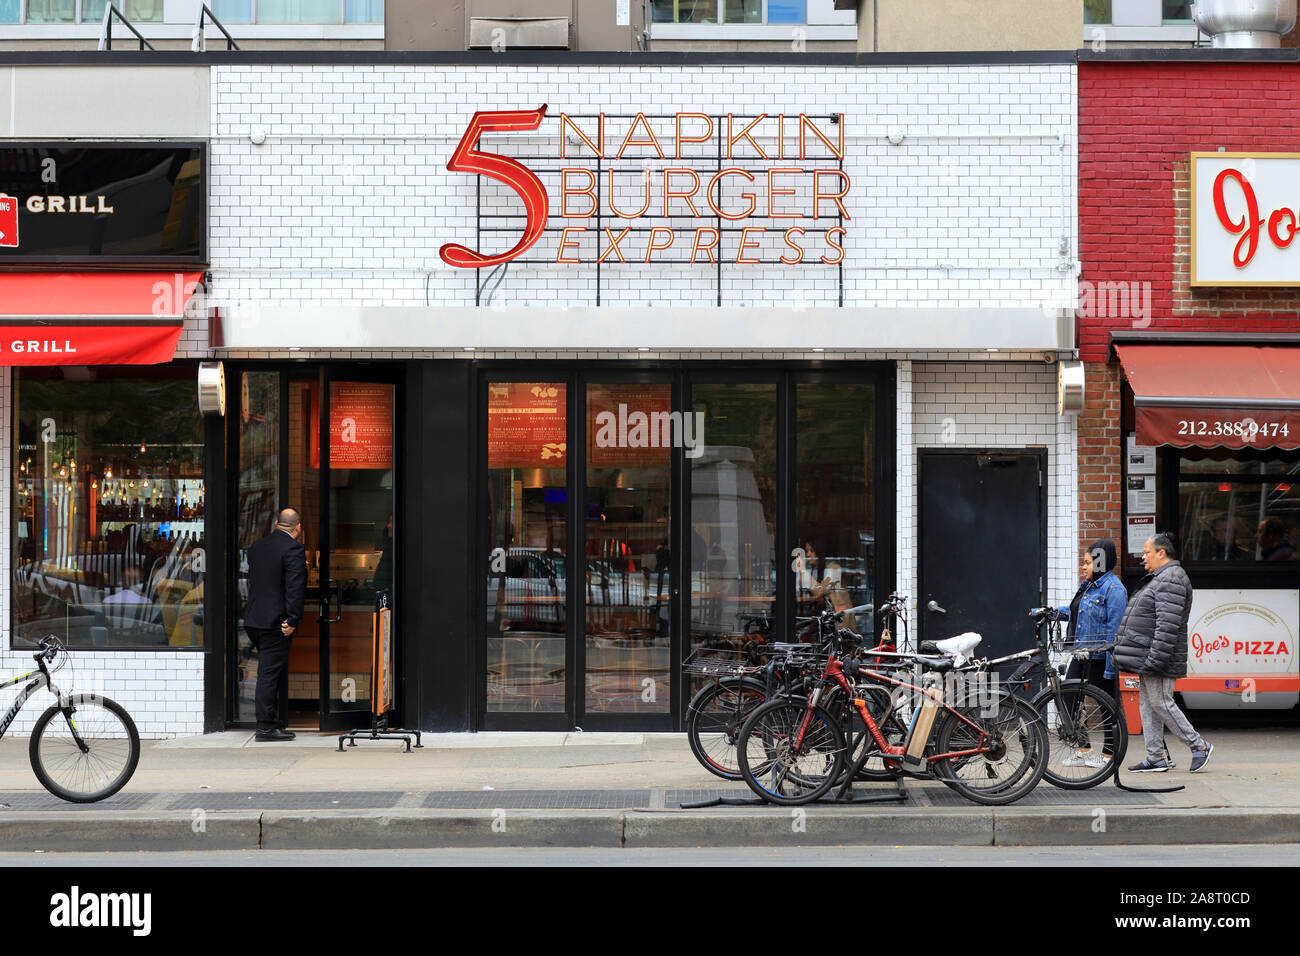 [historical storefront] 5 Napkin Burger Express, 154 East 14th St, New York, NYC storefront photo of a fast casual restaurant in the East Village Stock Photo